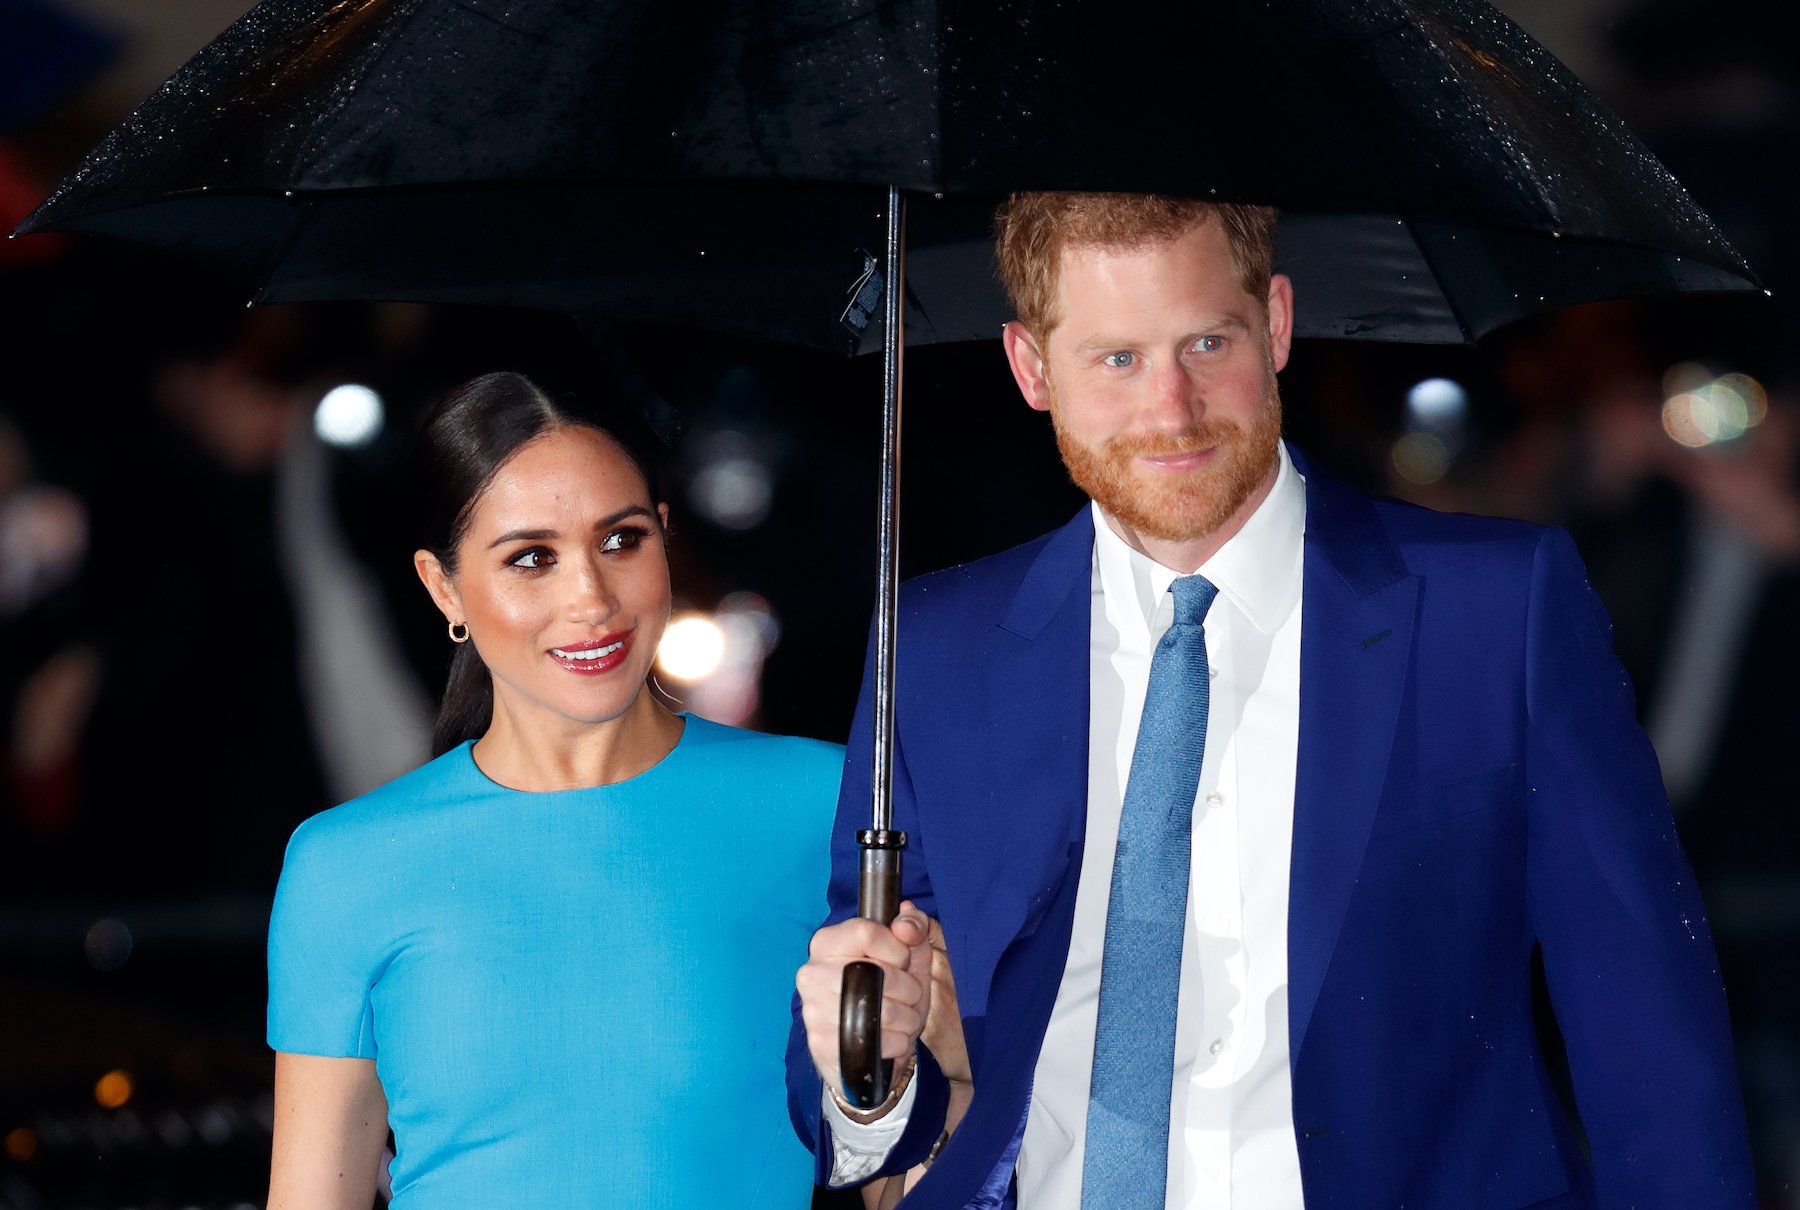 Meghan Markle and Prince Harry standing underneath an umbrella